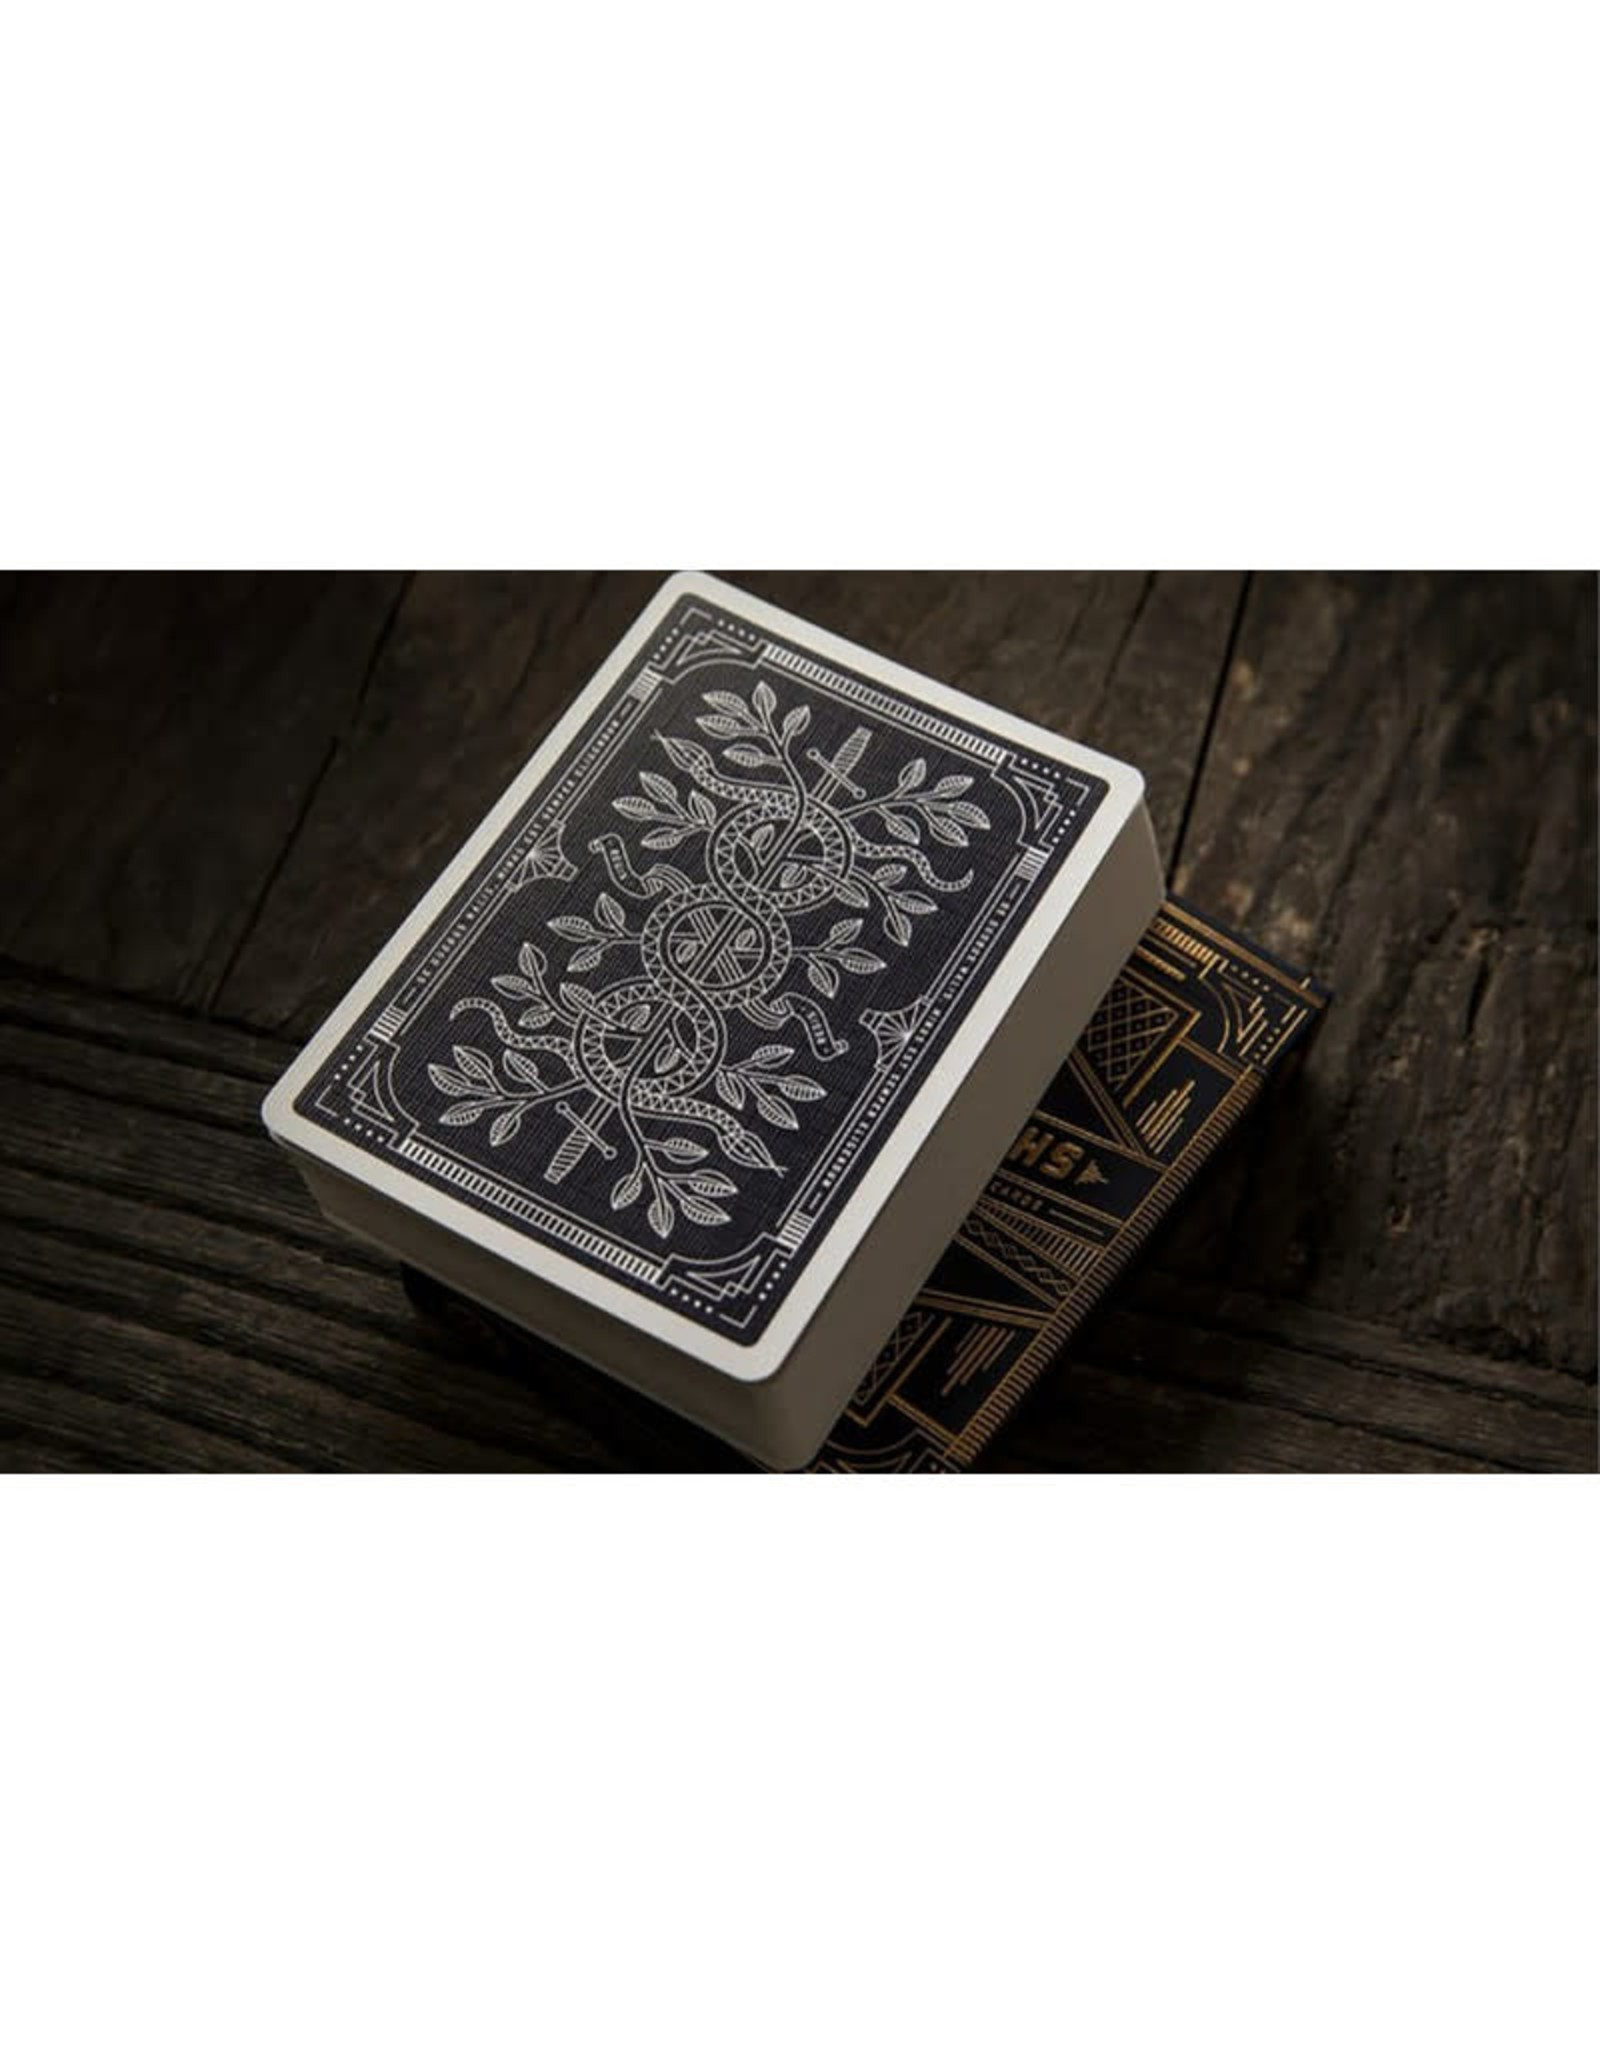 United States Playing Card Co Playing Cards: Bicycle Theory11 Monarchs